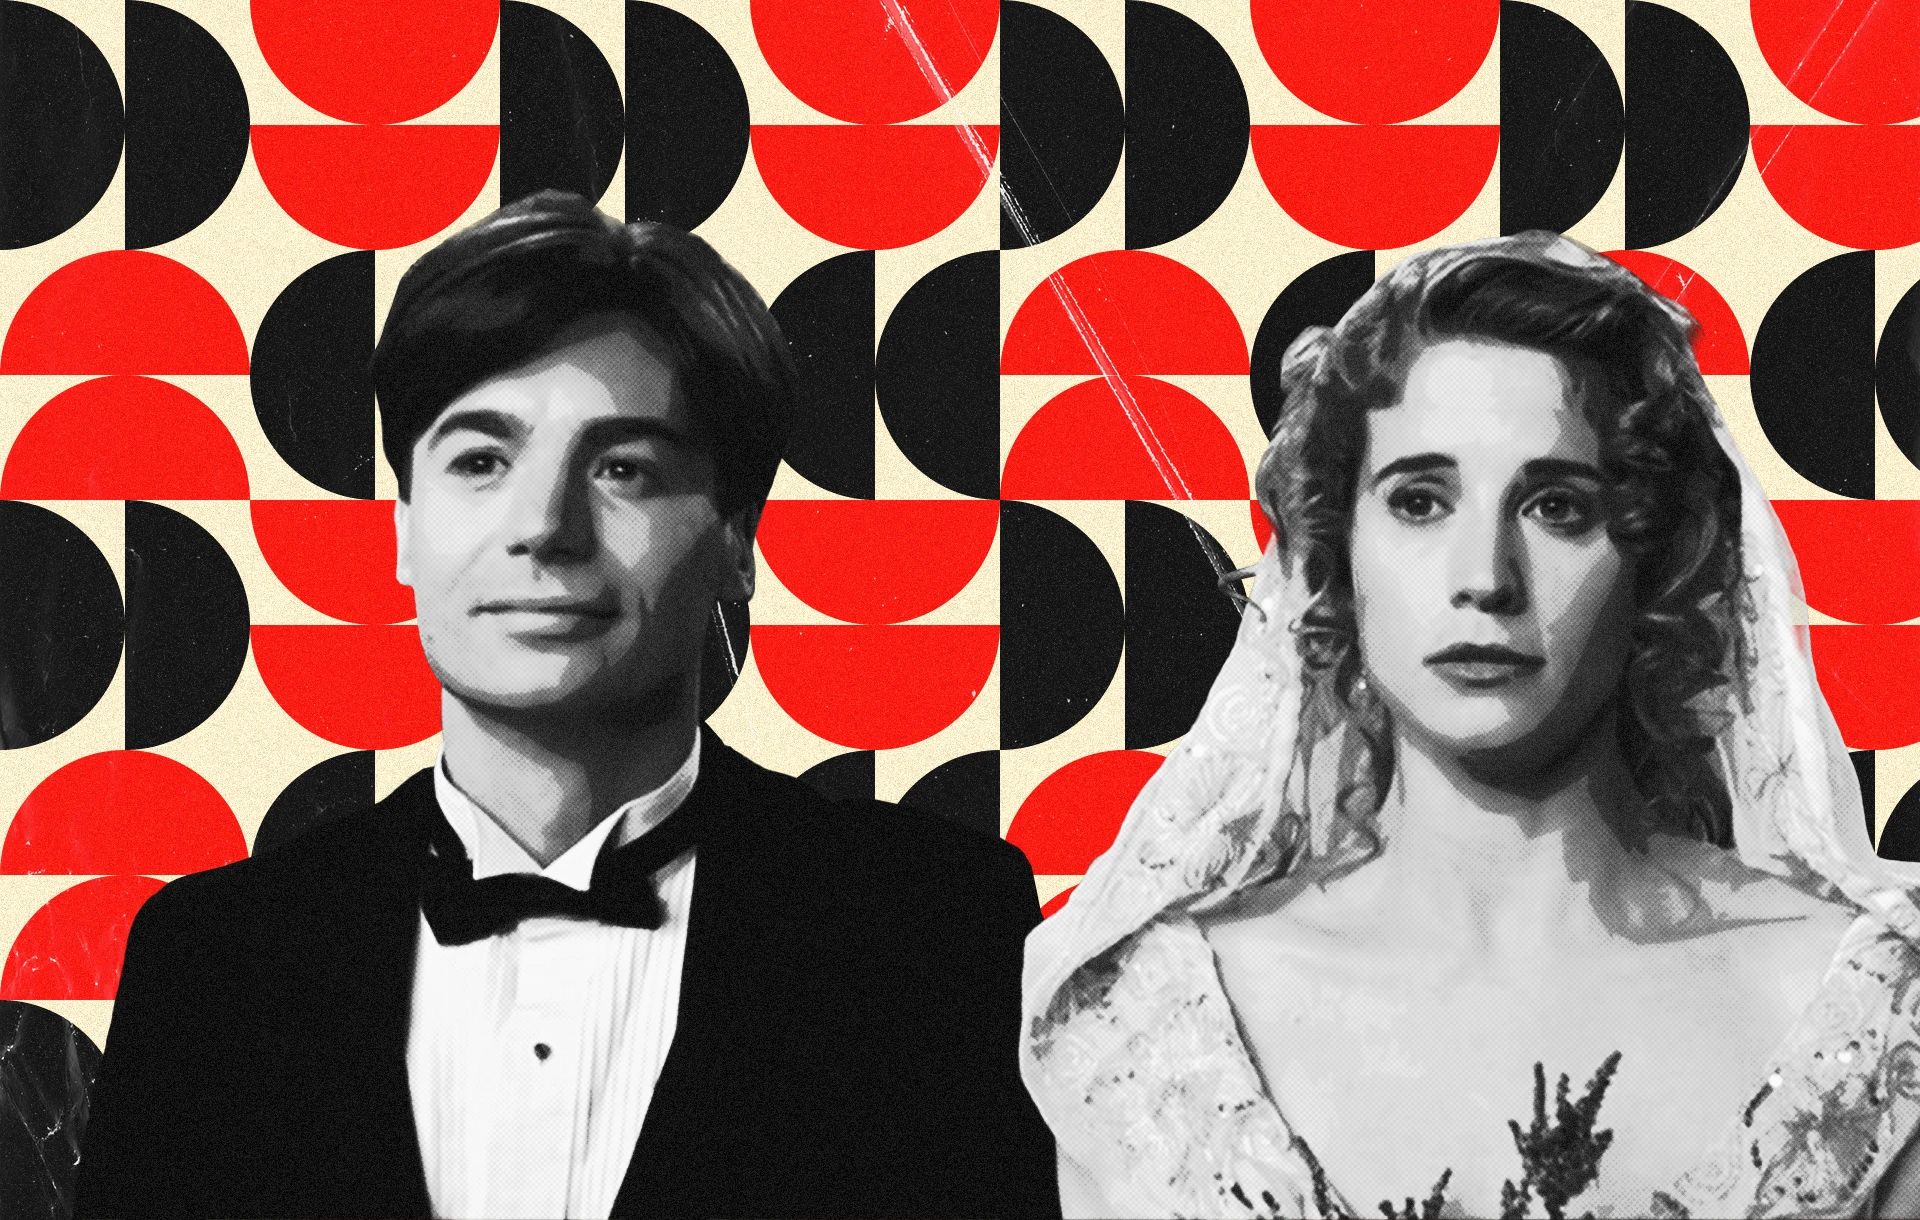 30 Years of 'So I Married an Axe Murderer', a Romantic Comedy that's All Over the Place | Features | LIVING LIFE FEARLESS